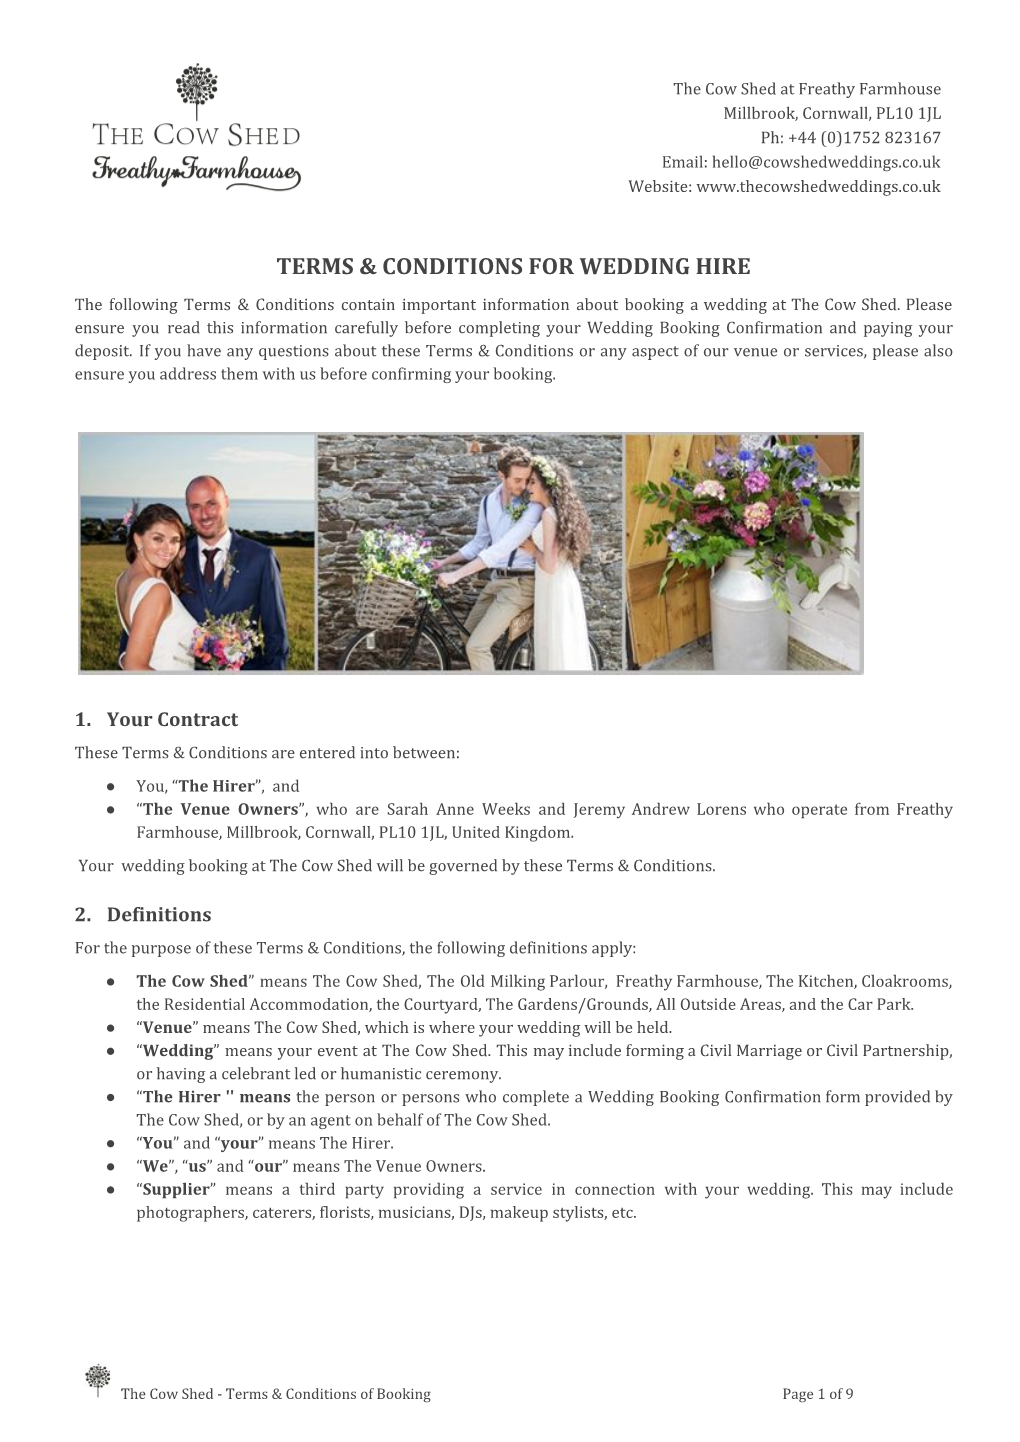 Terms & Conditions for Wedding Hire